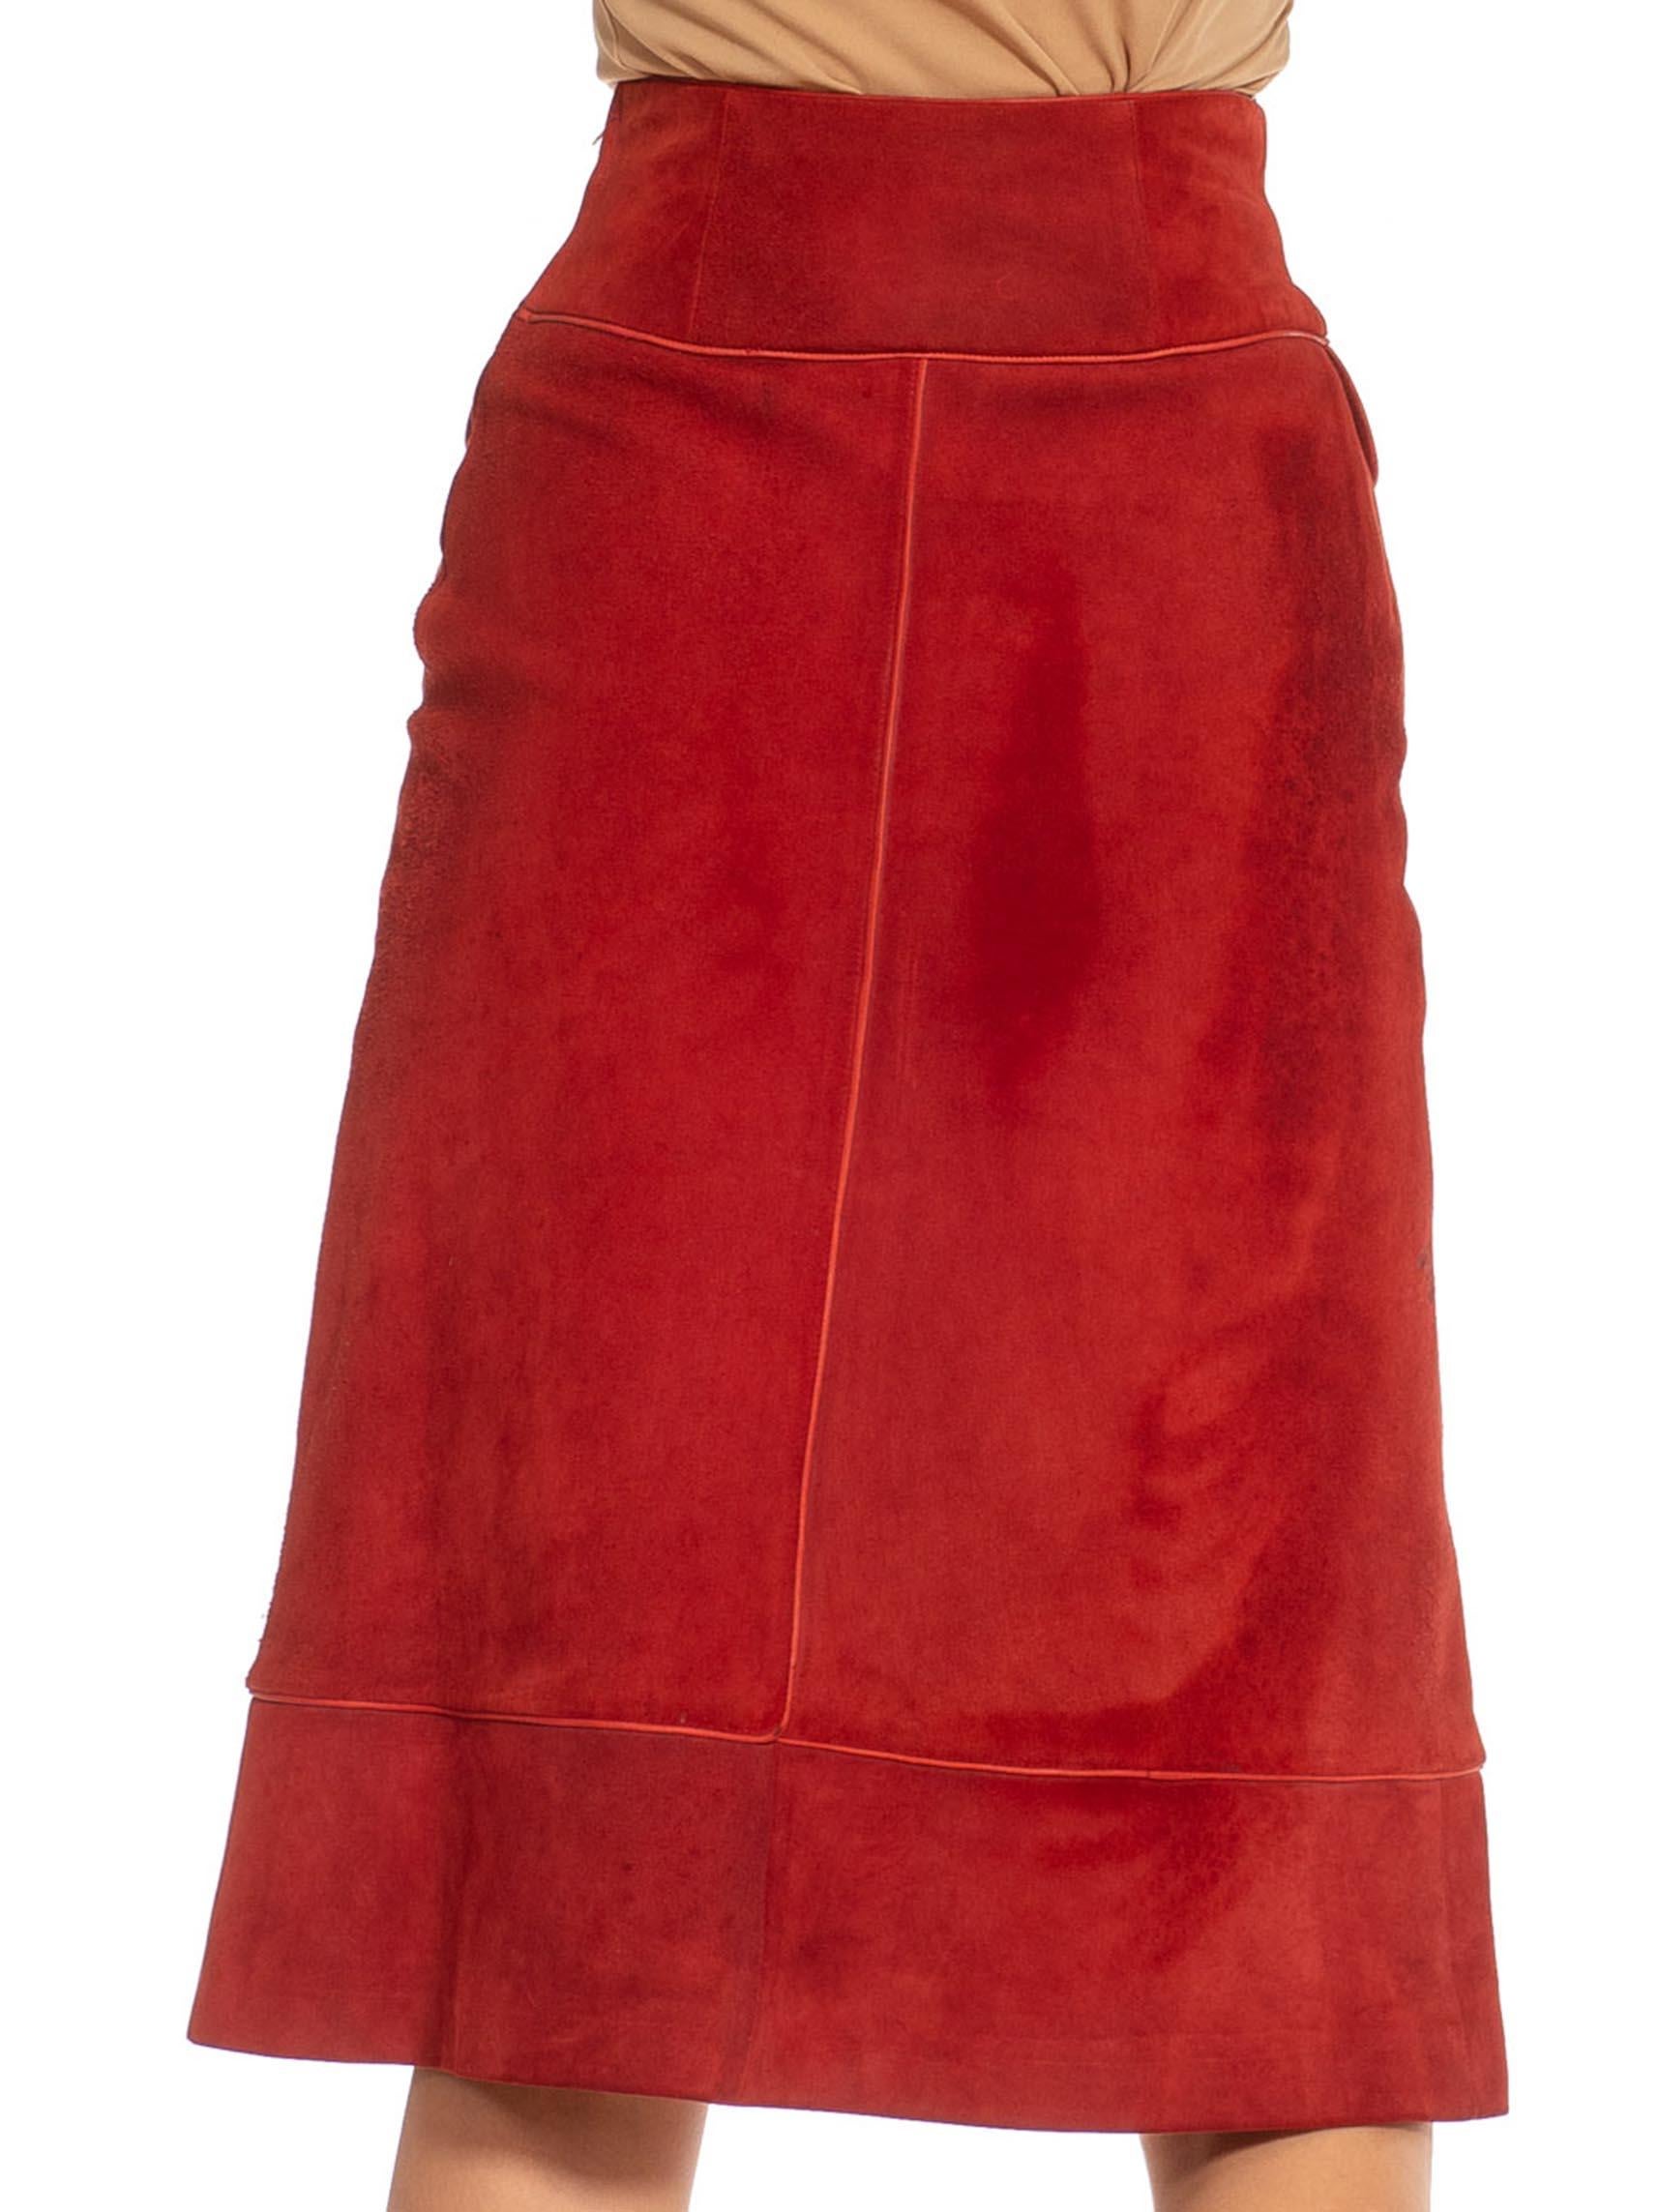 Red 1990S GUCCI Burgundy & Gold Suede Midi Buckle Skirt